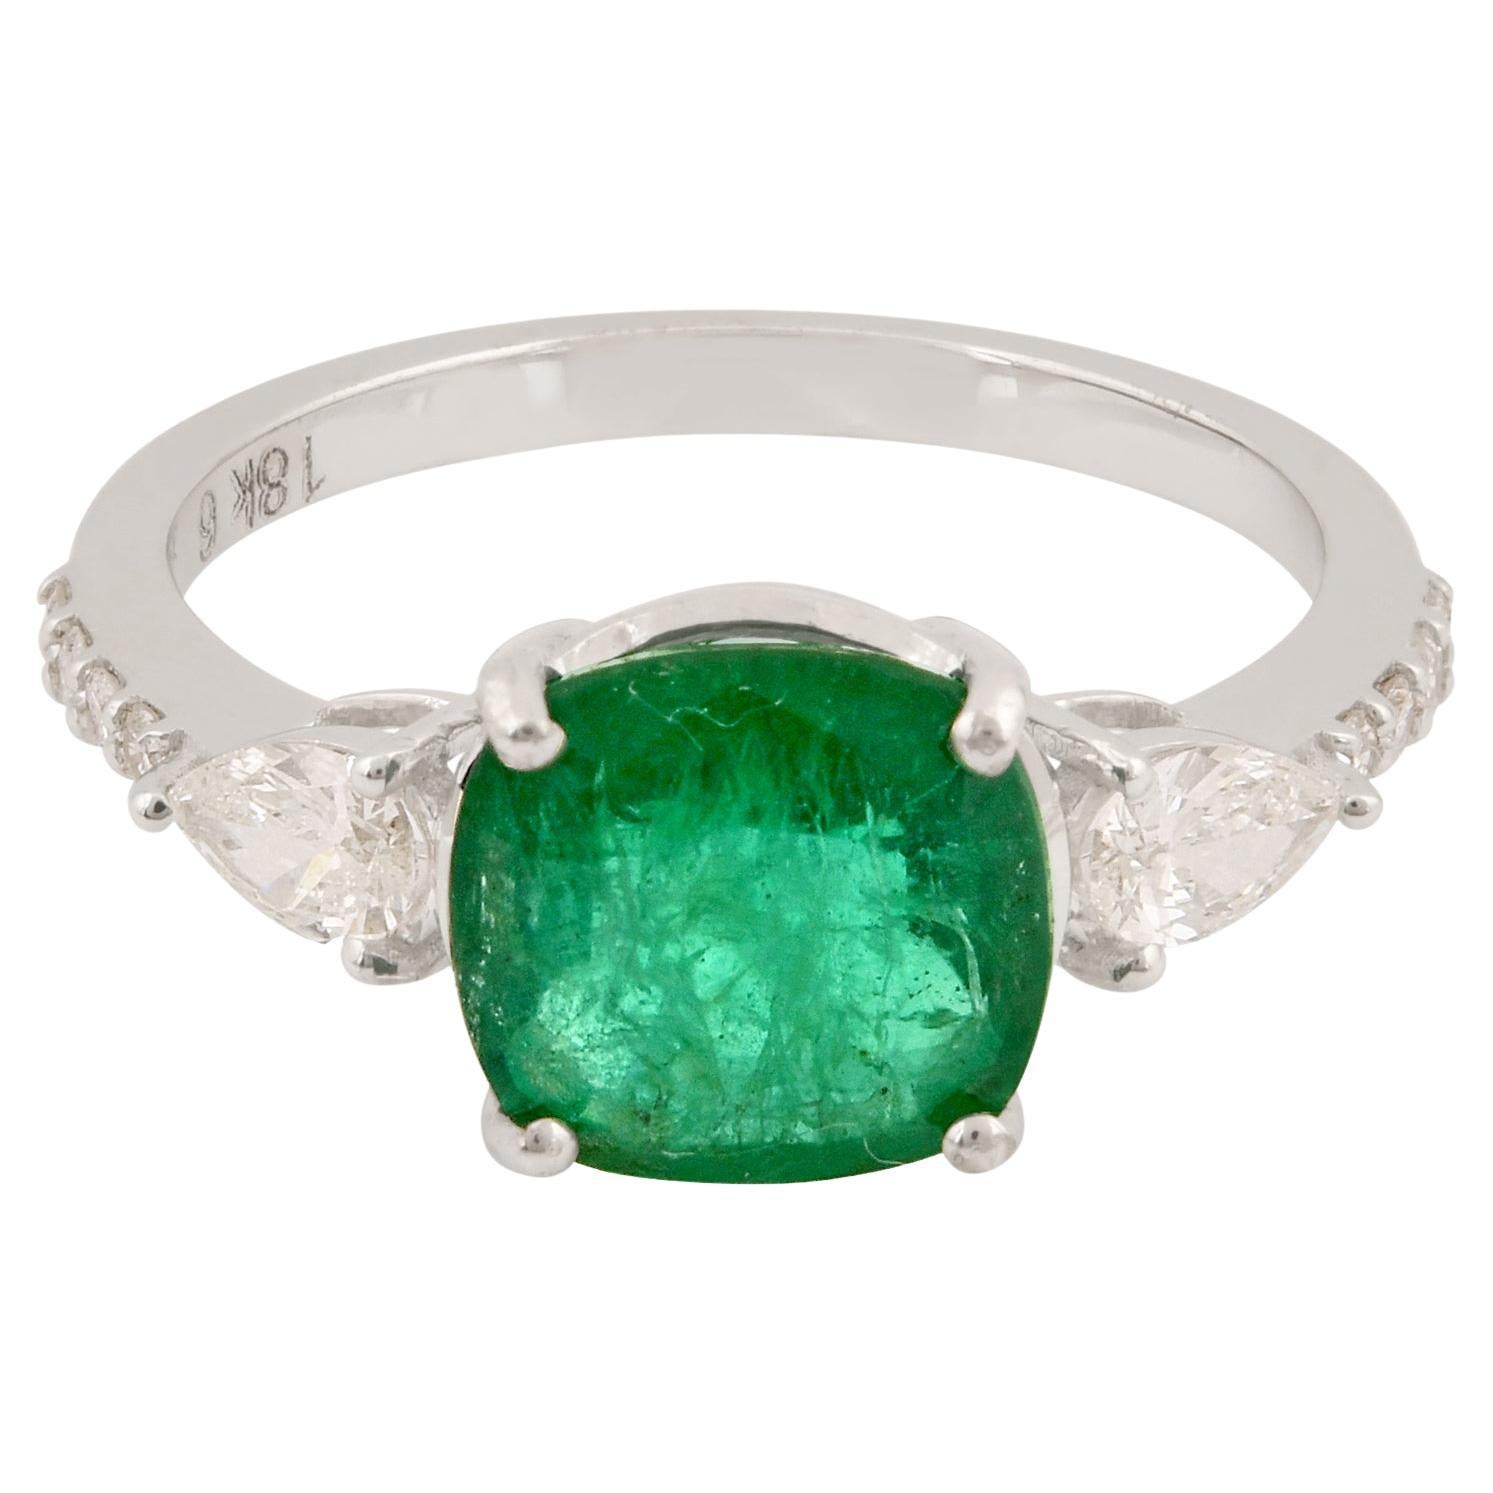 For Sale:  Natural Emerald Cocktail Ring Pear Diamond Solid 18k White Gold Handmade Jewelry